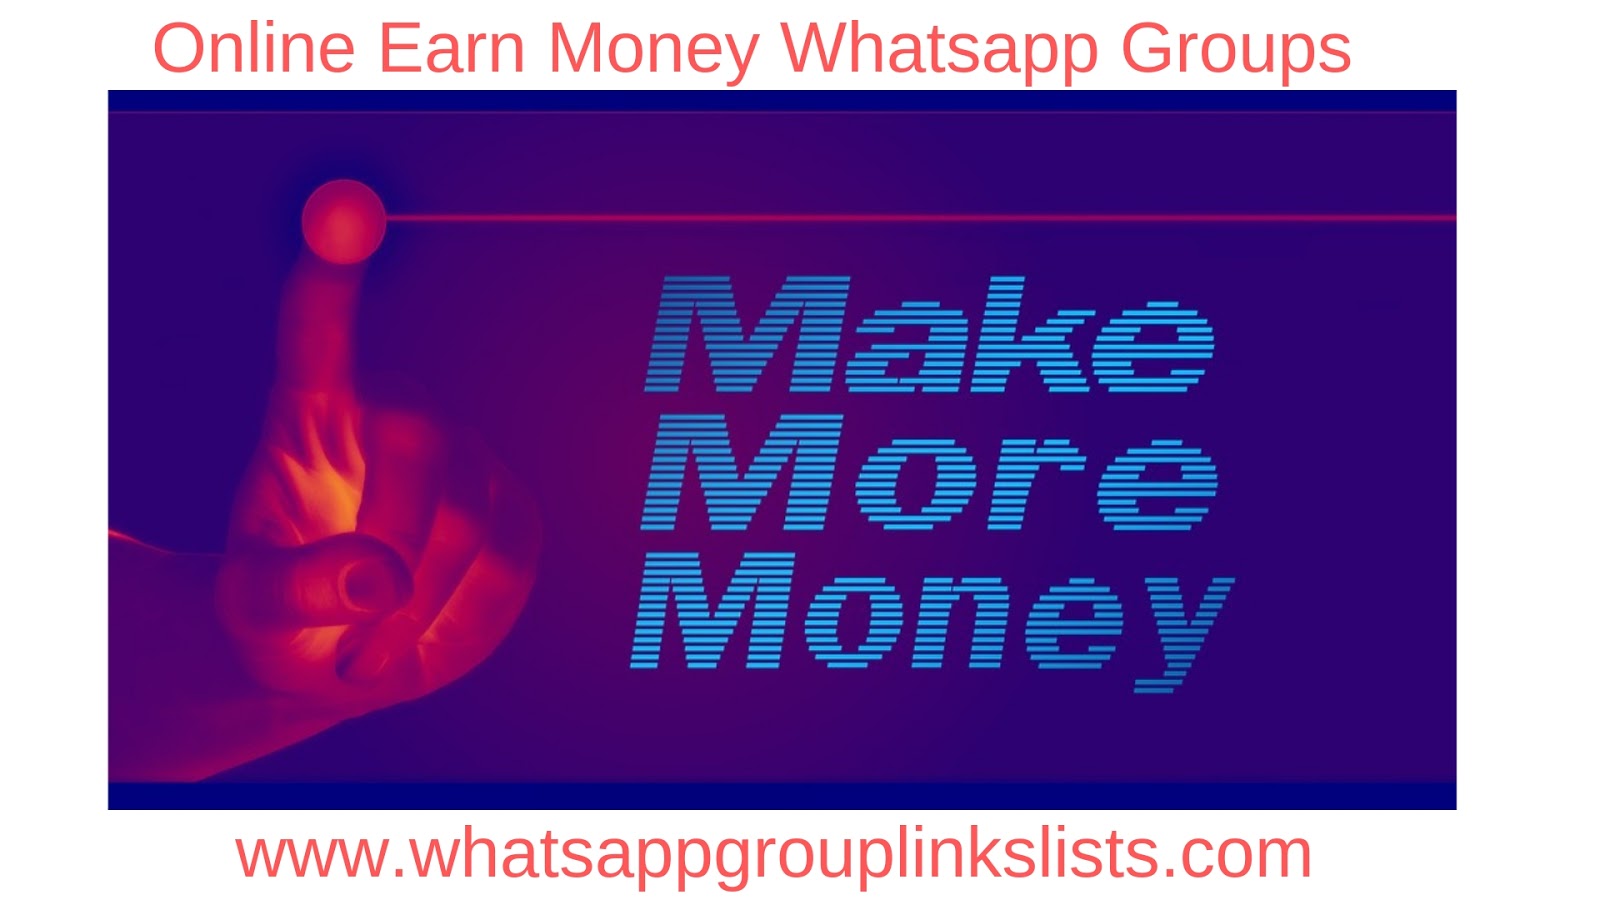 1000+ Whatsapp Group Links to Join – 2019 Best [*Active*] Chat Groups